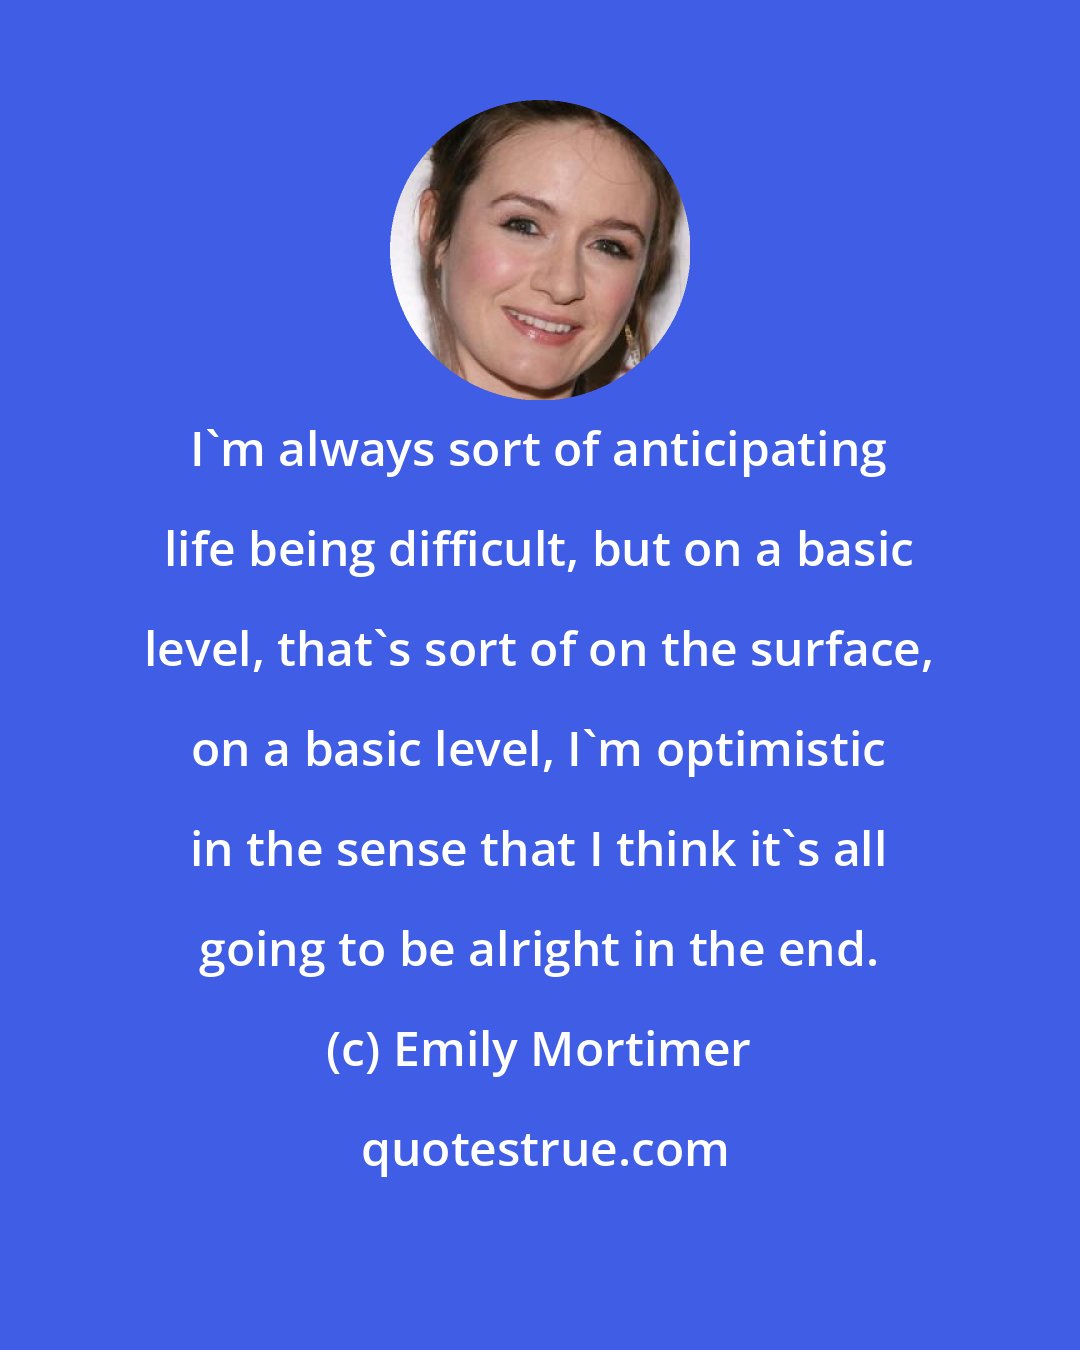 Emily Mortimer: I'm always sort of anticipating life being difficult, but on a basic level, that's sort of on the surface, on a basic level, I'm optimistic in the sense that I think it's all going to be alright in the end.